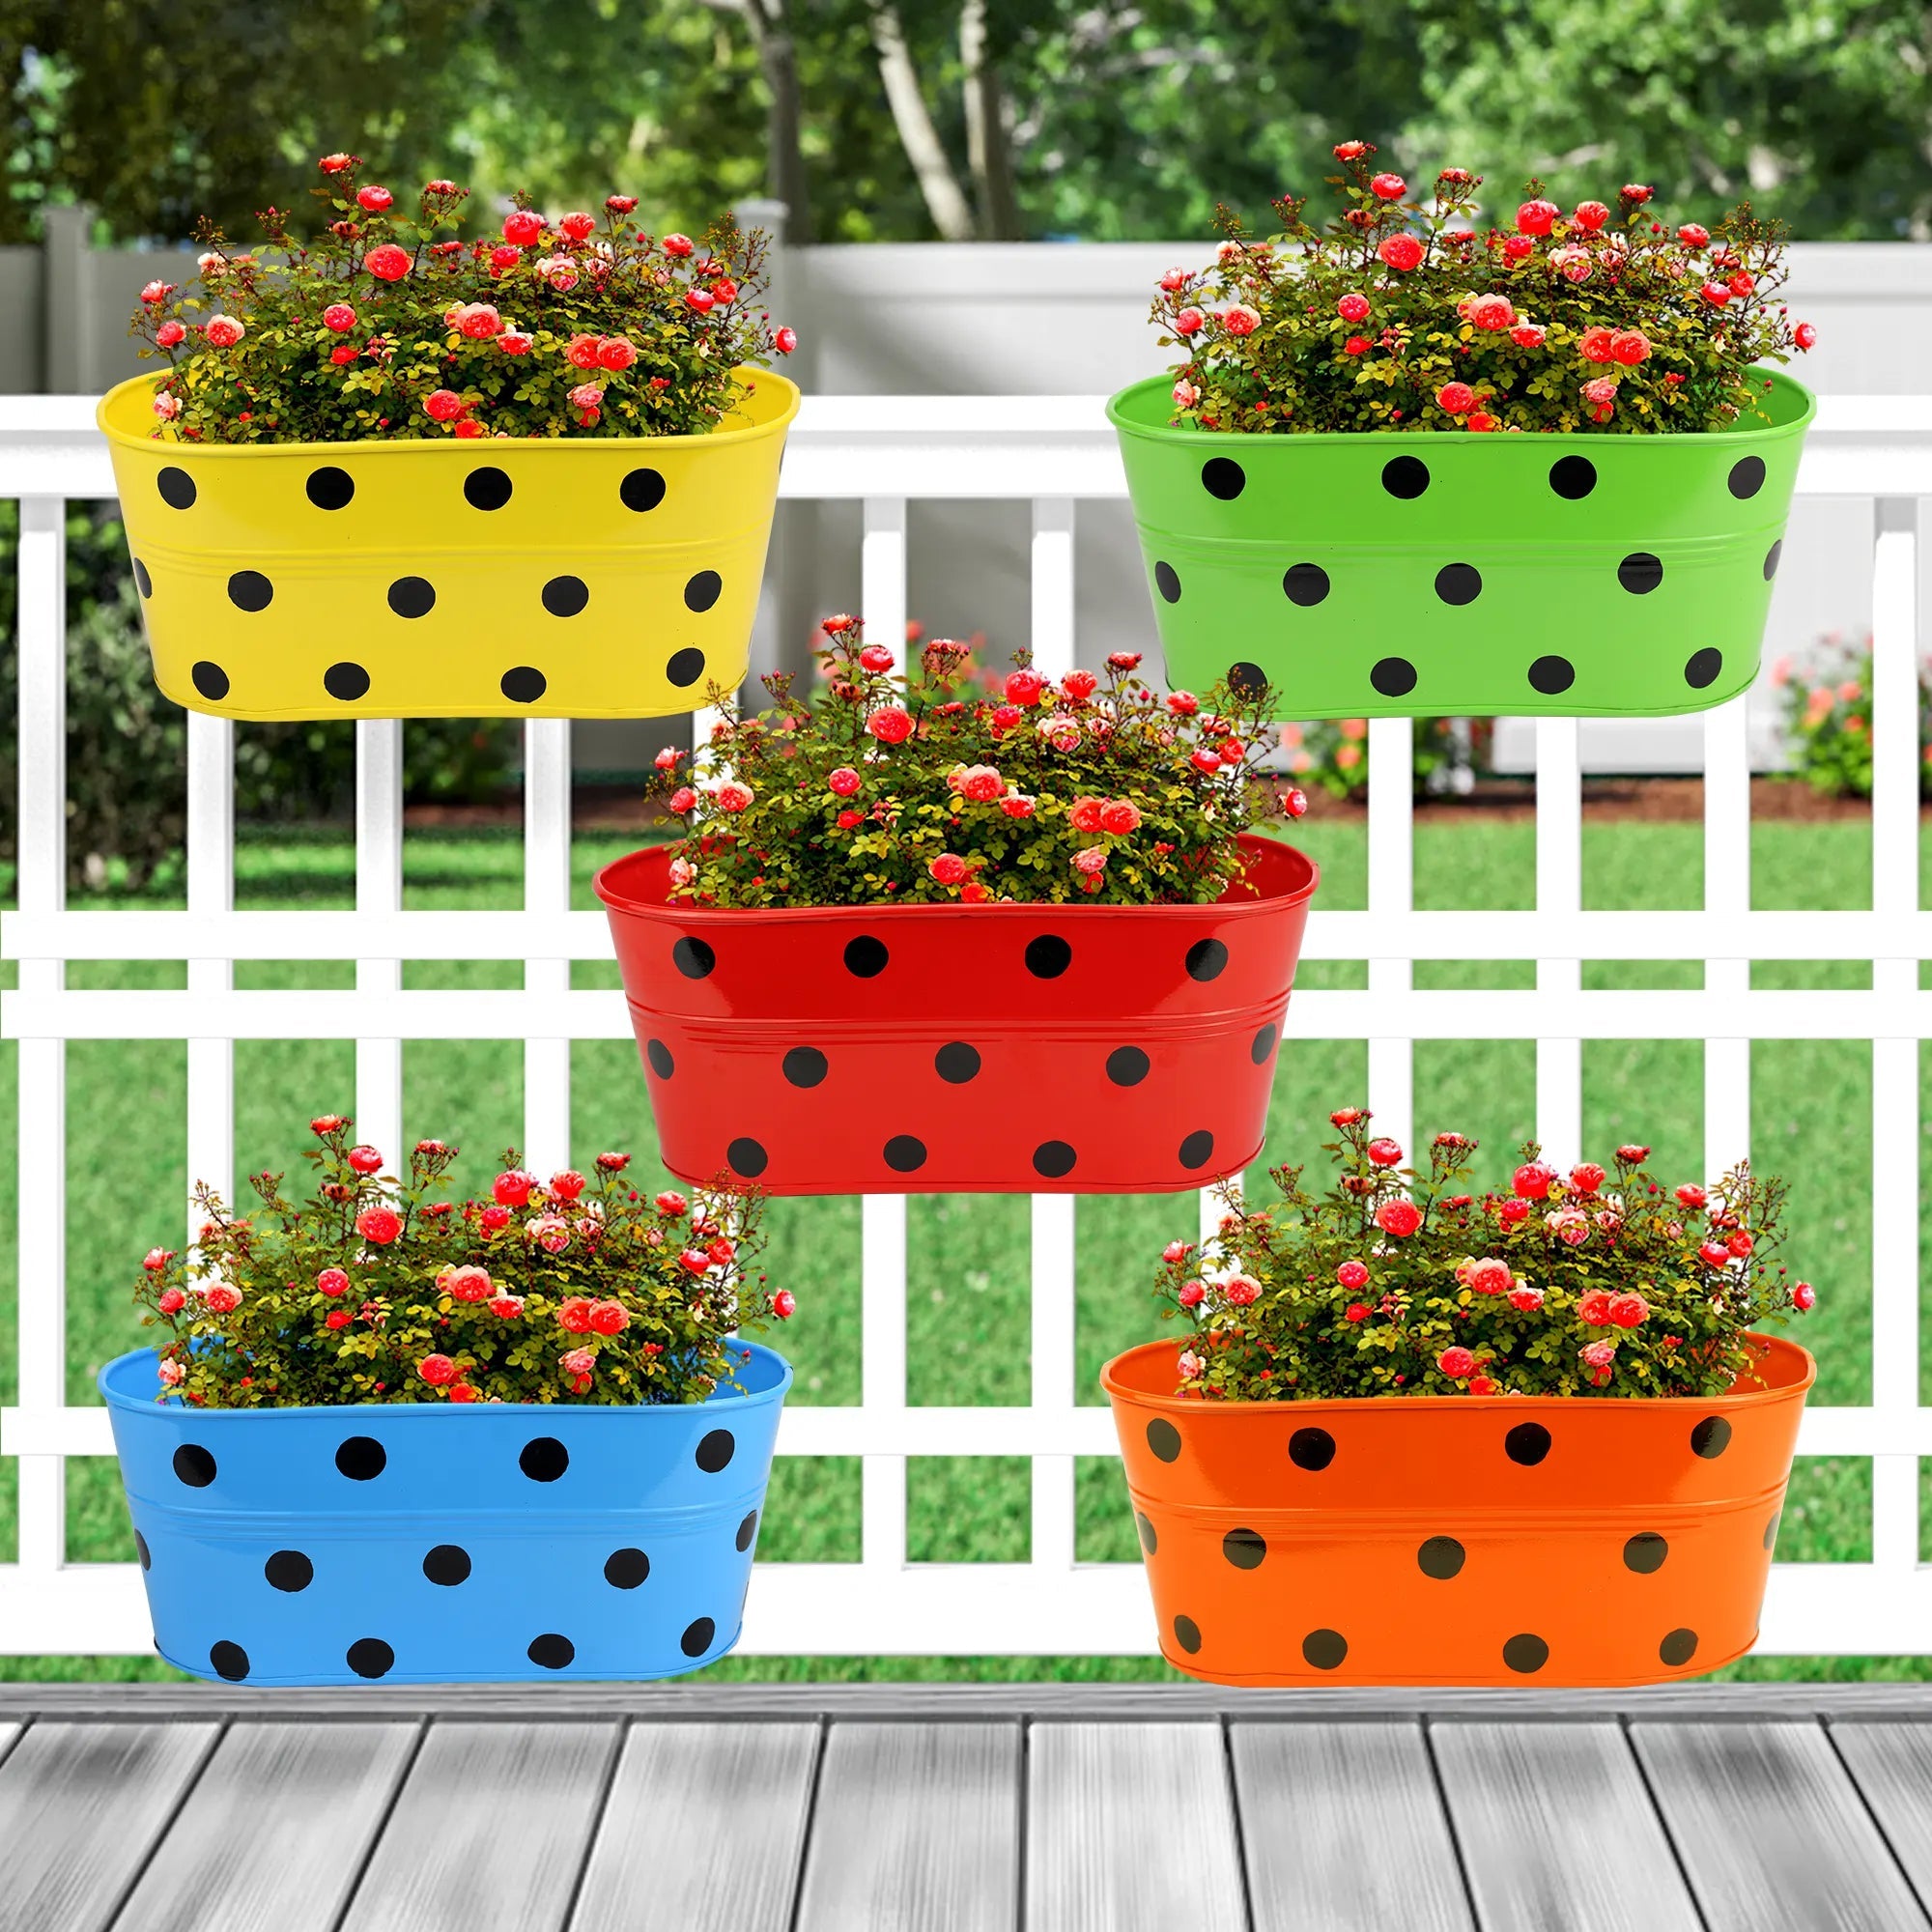 Hanging Planter Dot Oval Shaped 12 Inch (Green, Red, Blue and Yellow) (Set of 5) Oval Balcony Hanging Pot Urban Plant 